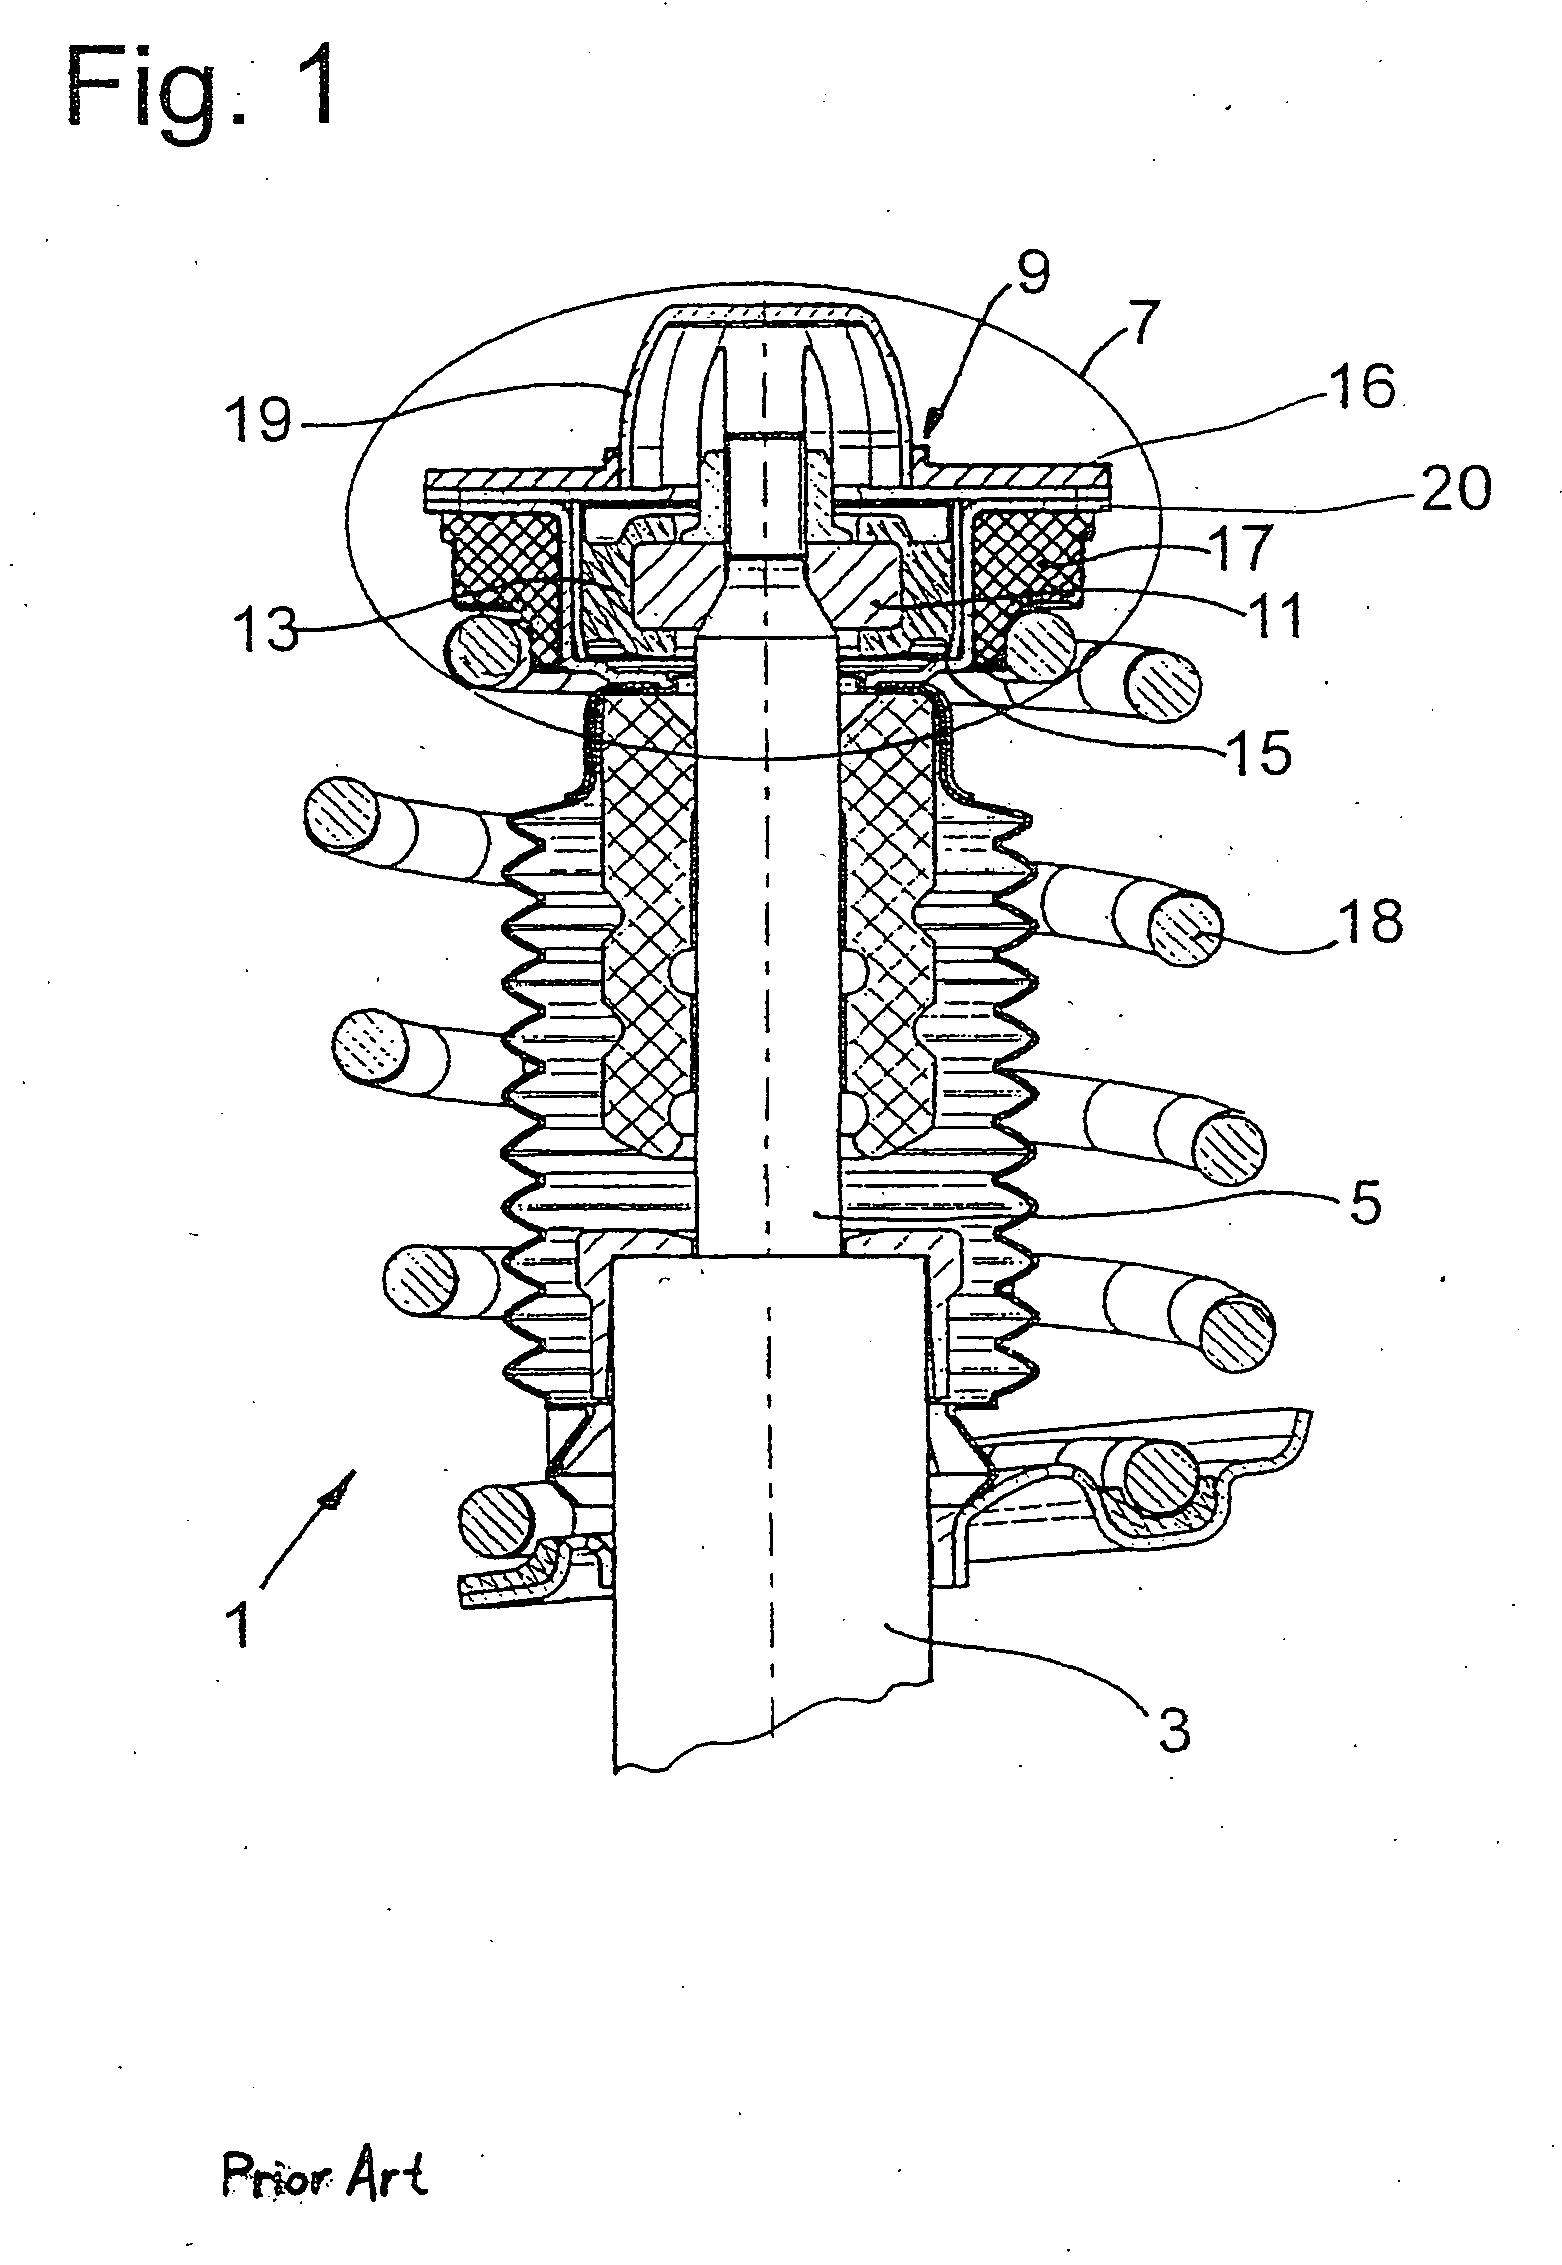 Mounting assembly for a vibration damper